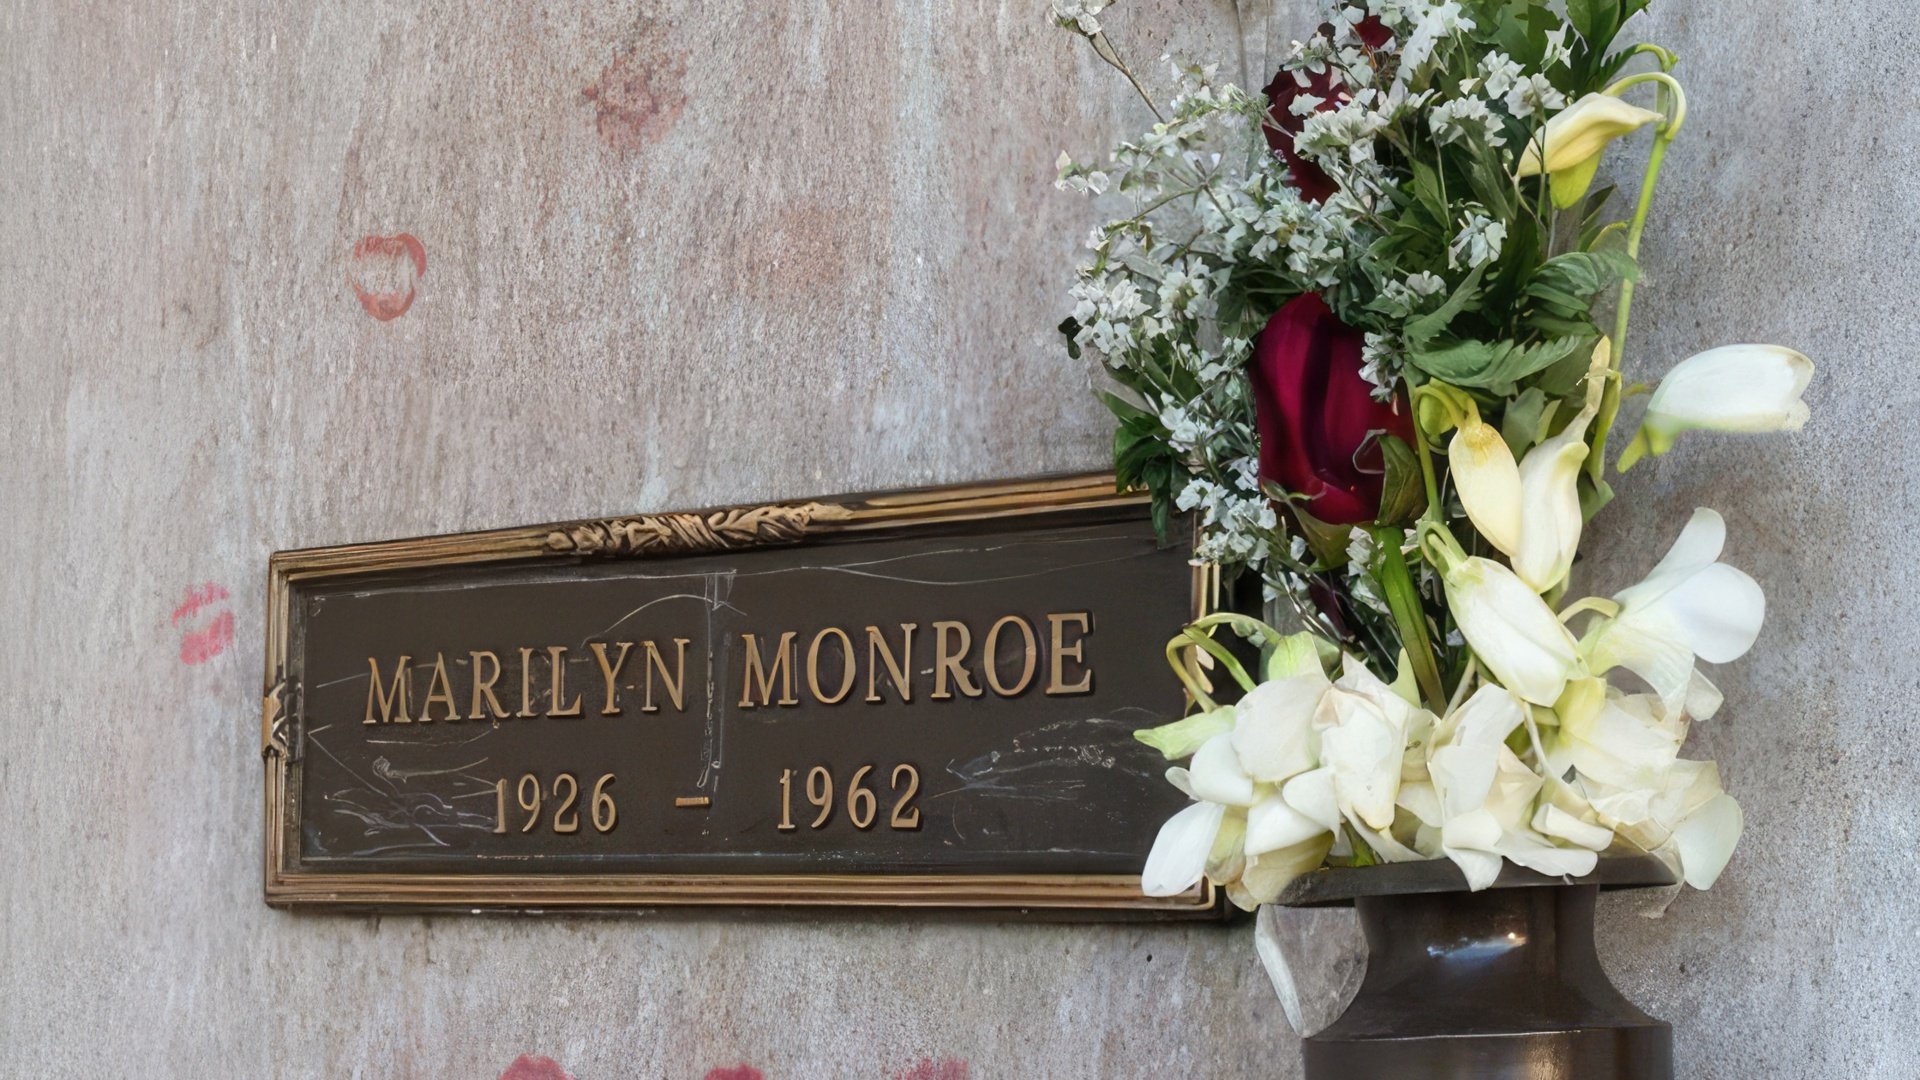 Marilyn Monroe is buried in a crypt at Westwood Village Memorial Park Cemetery in Los-Angeles